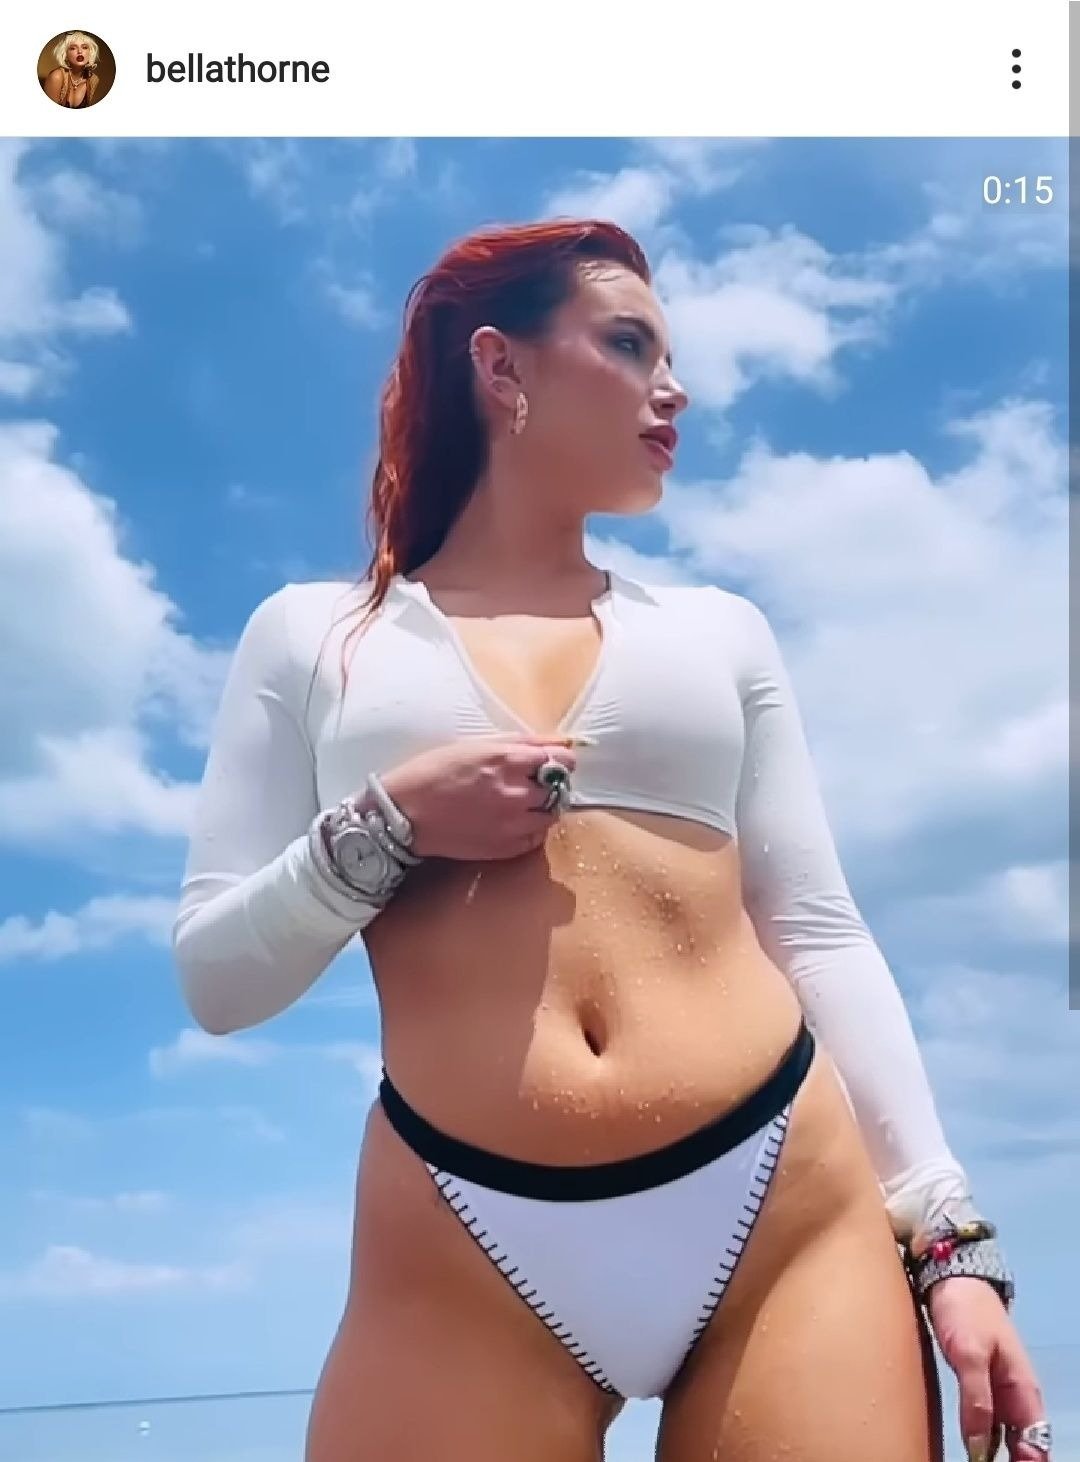 Bella Thorne flaunts her curves in a white two-piece swimsuit at the beach. | Photo: Instagram/@bellathorne